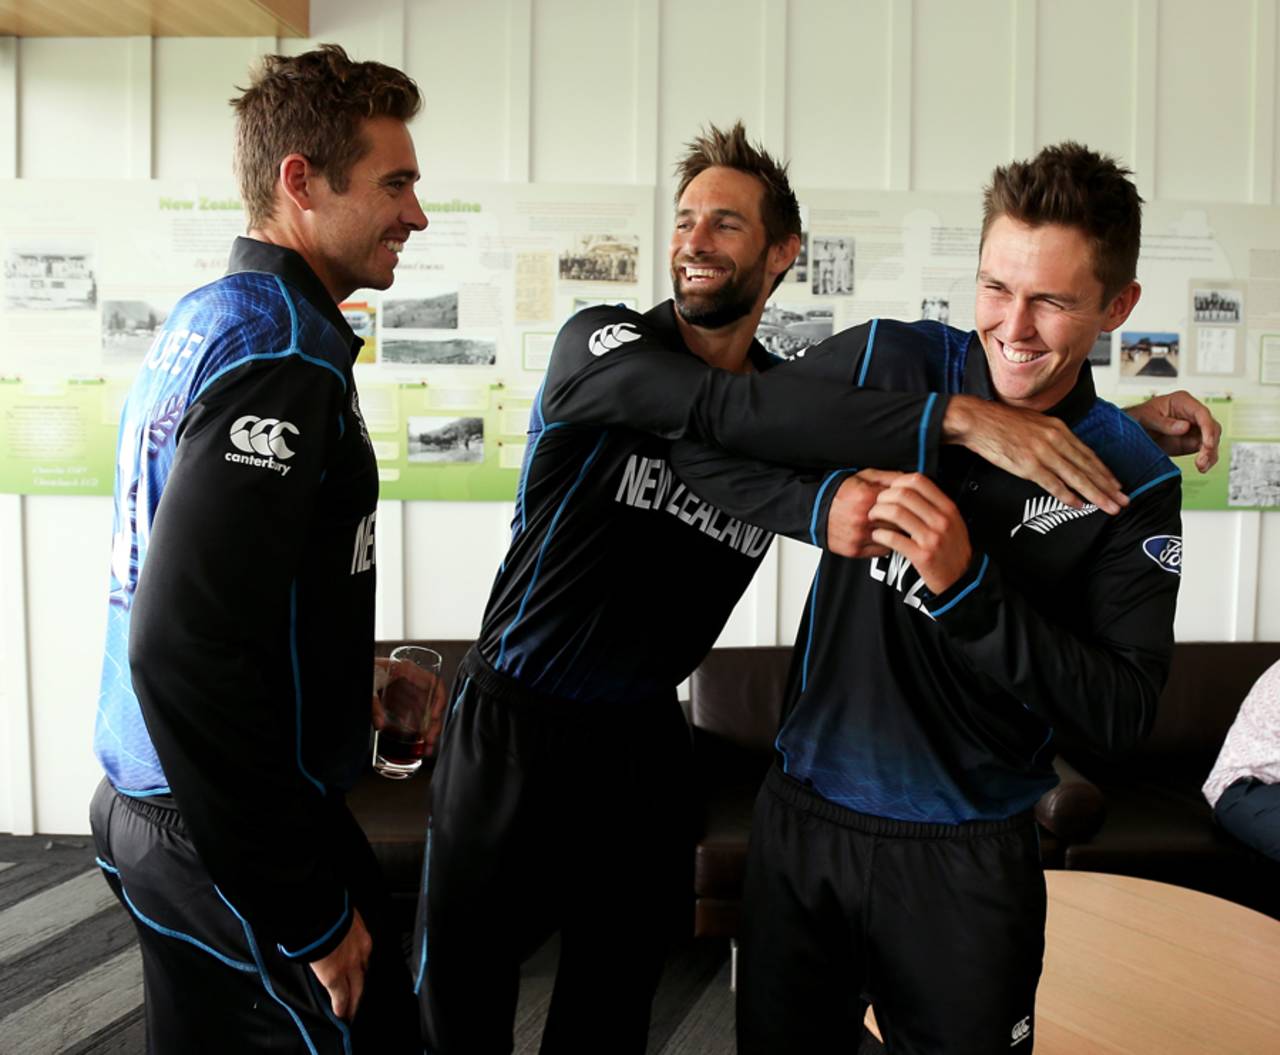 Tim Southee, Grant Elliott and Trent Boult have some fun at the launch of New Zealand's World Cup squad, Christchurch, January 8, 2015